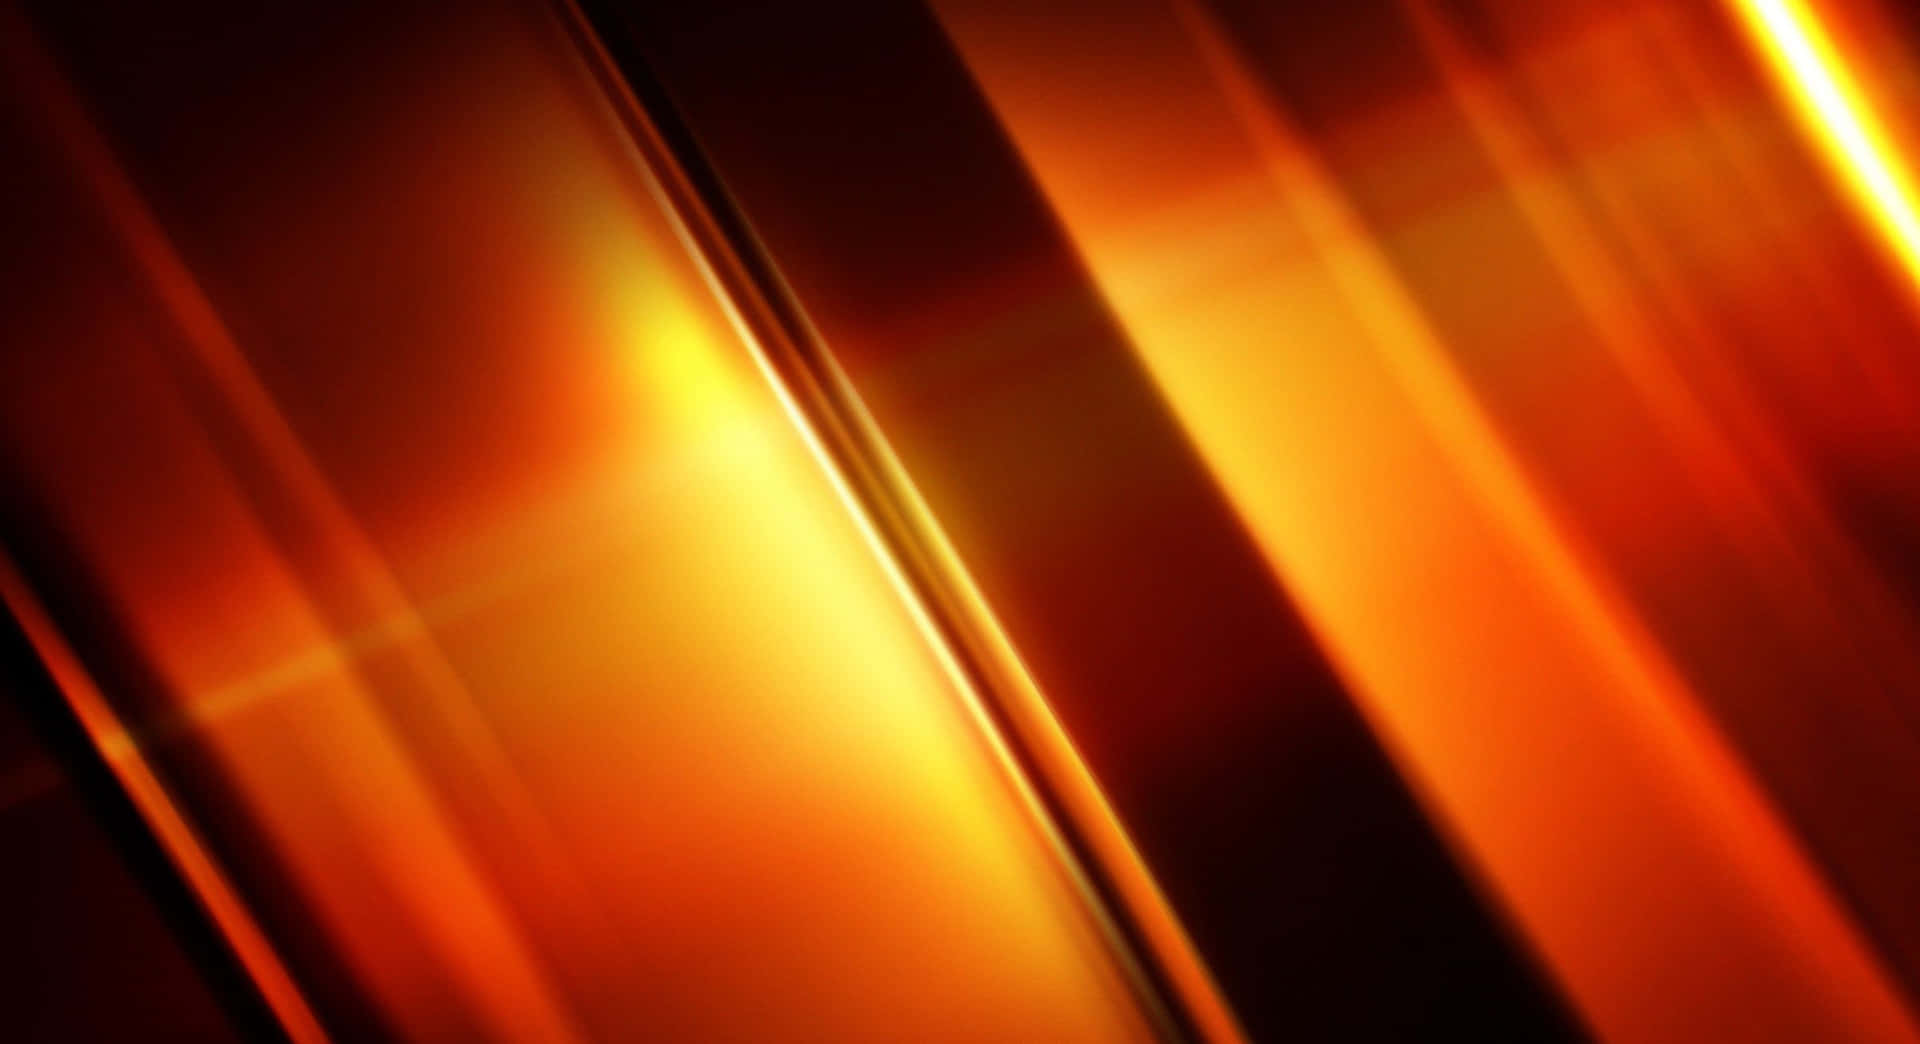 An Orange And Black Abstract Background